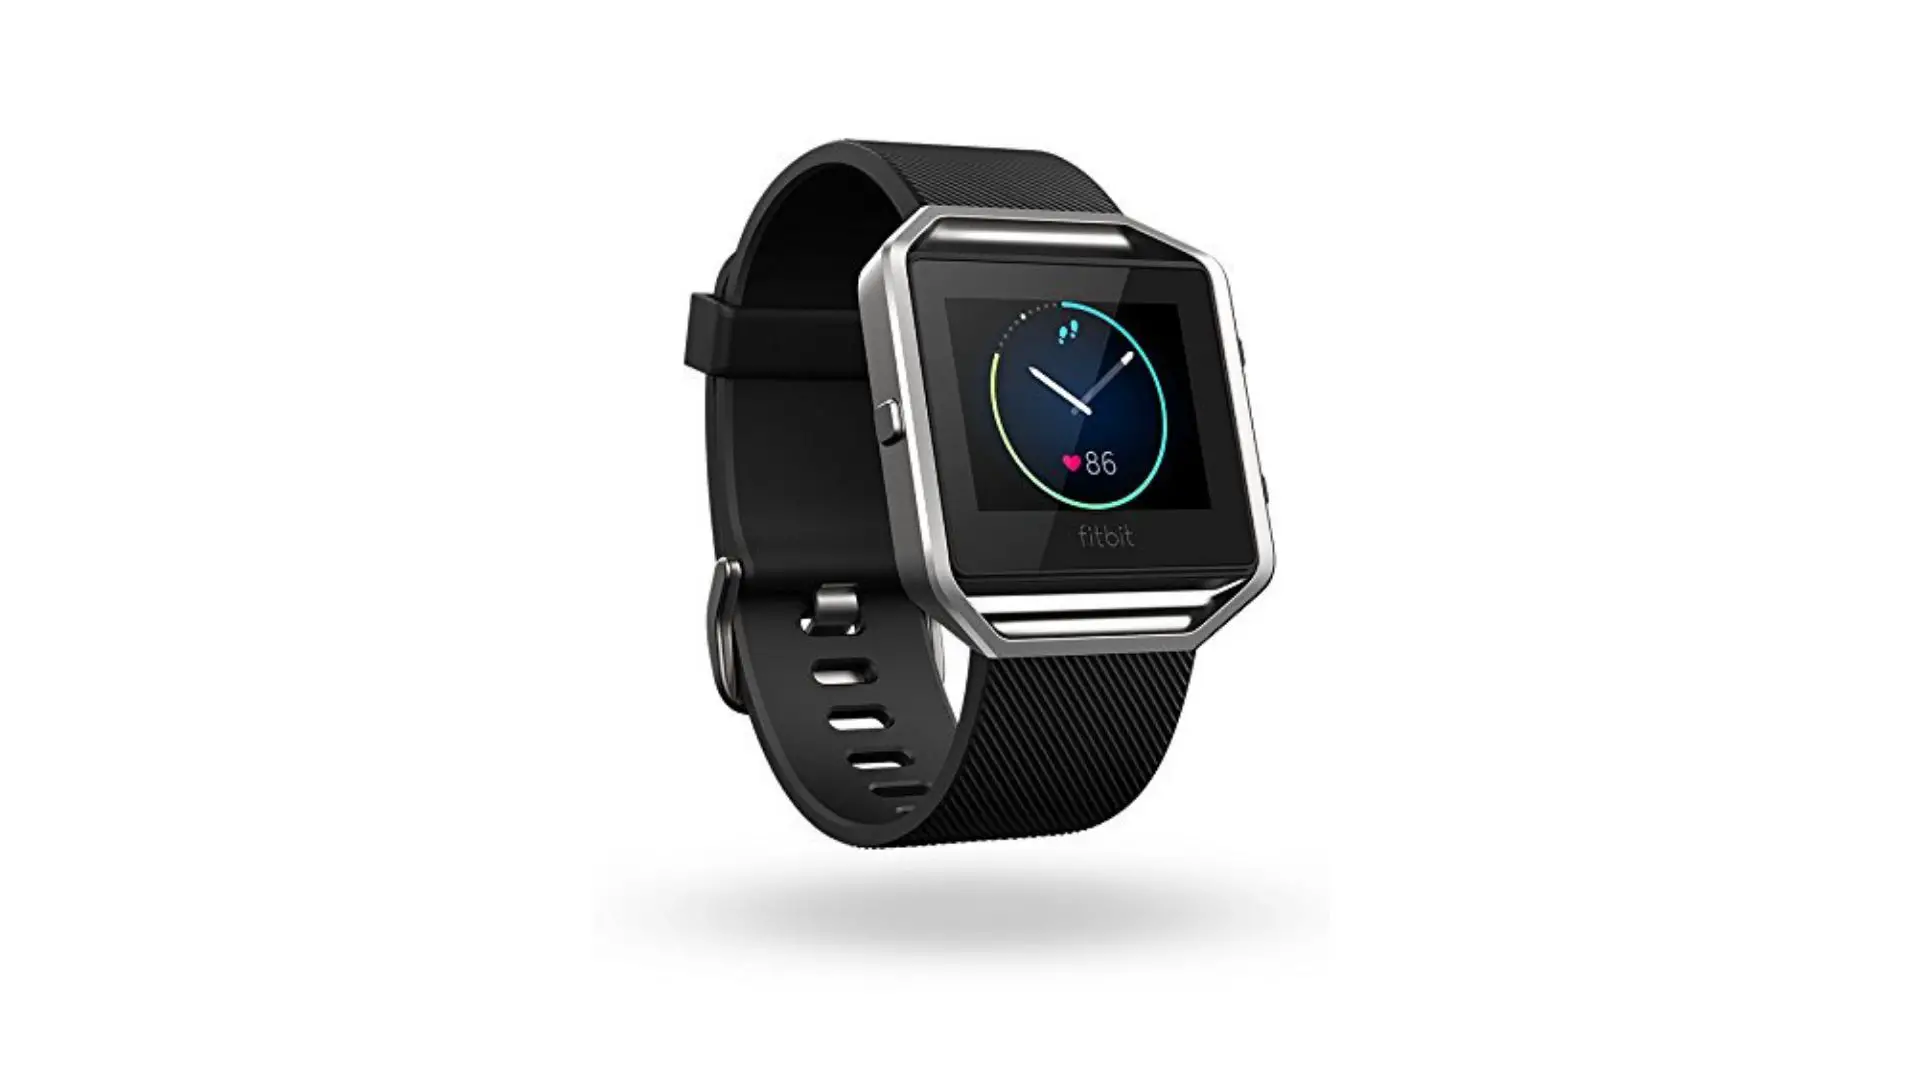 Resetting Fitbit Blaze to the factory settings